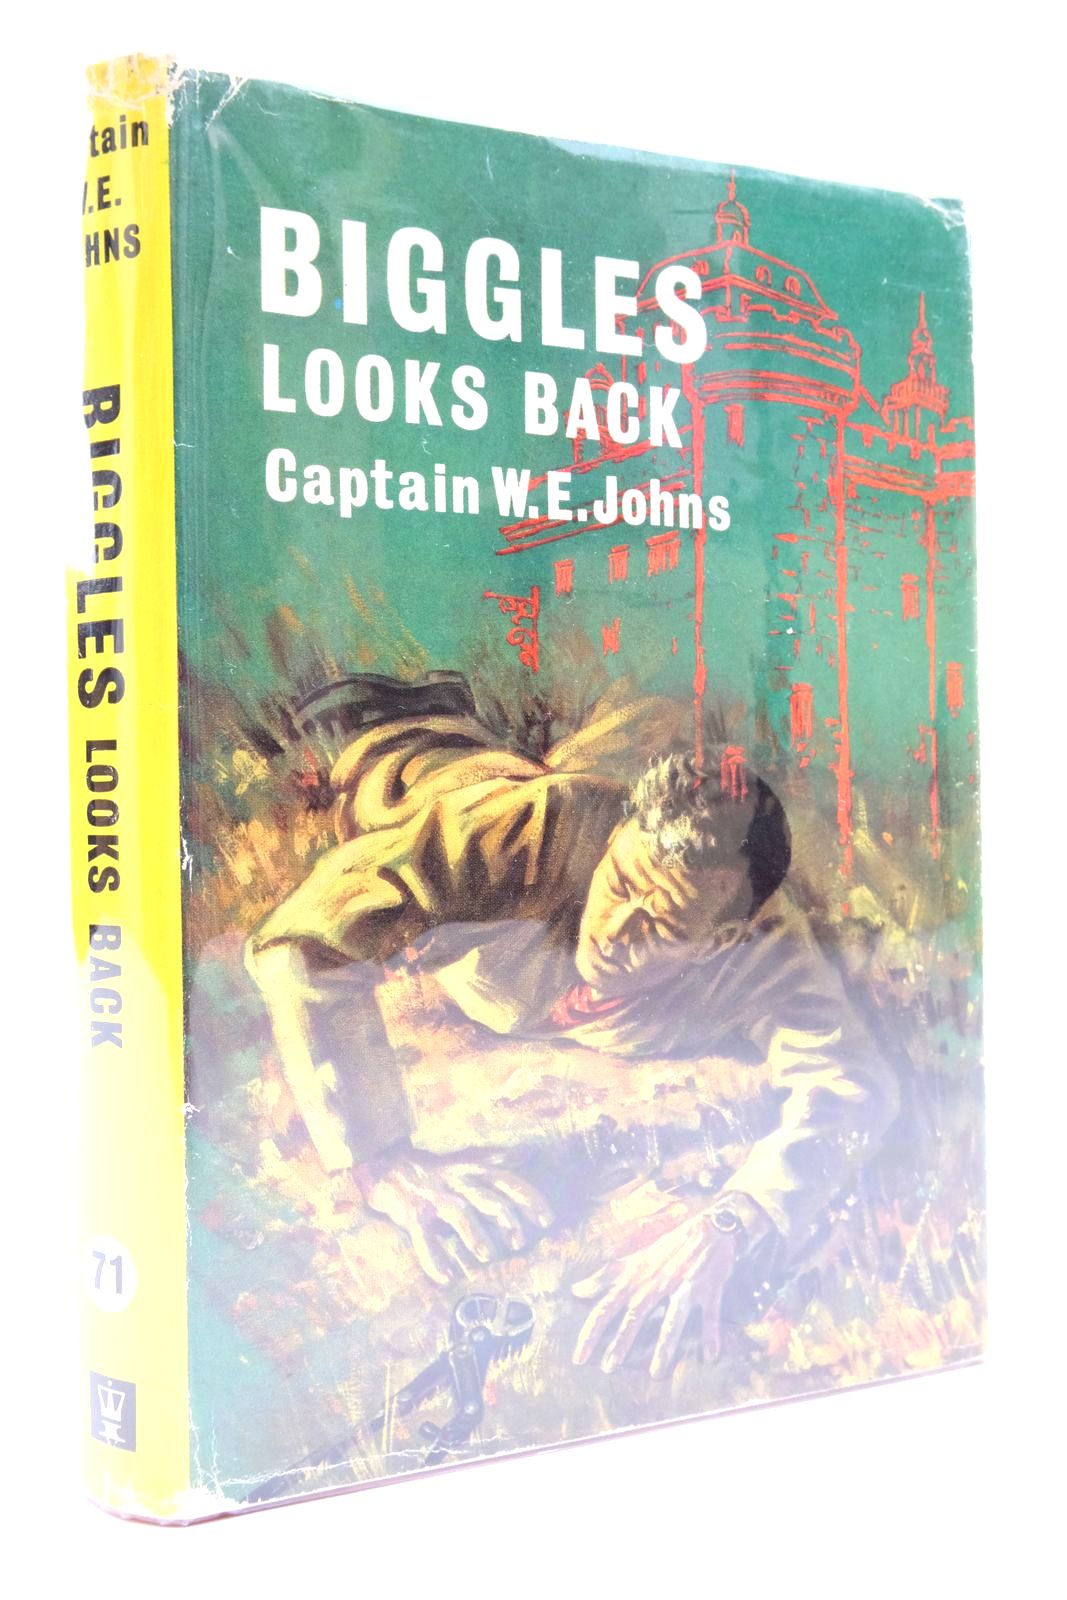 Photo of BIGGLES LOOKS BACK written by Johns, W.E. illustrated by Stead,  published by Hodder & Stoughton (STOCK CODE: 2137306)  for sale by Stella & Rose's Books